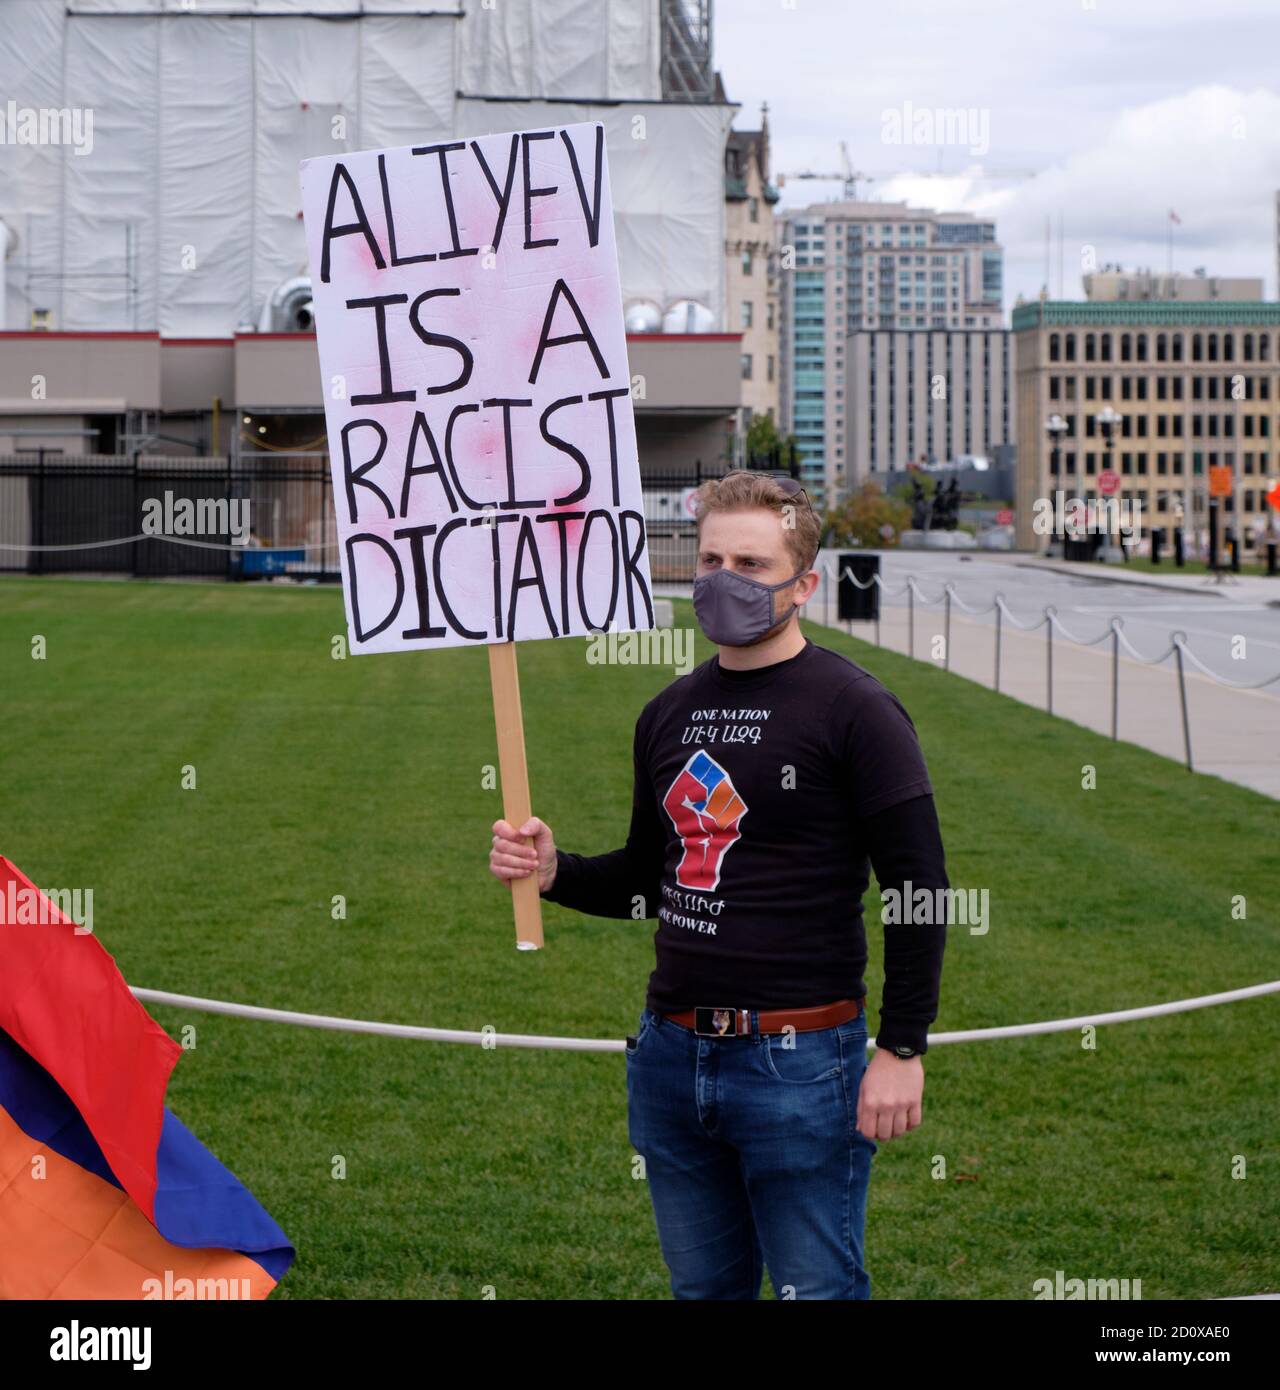 Armenian lead Protest to stop the Azeri aggression on Artzakh in front of Canadian Parliament. Protester with sign 'Aliyev is a racist dictator' Stock Photo